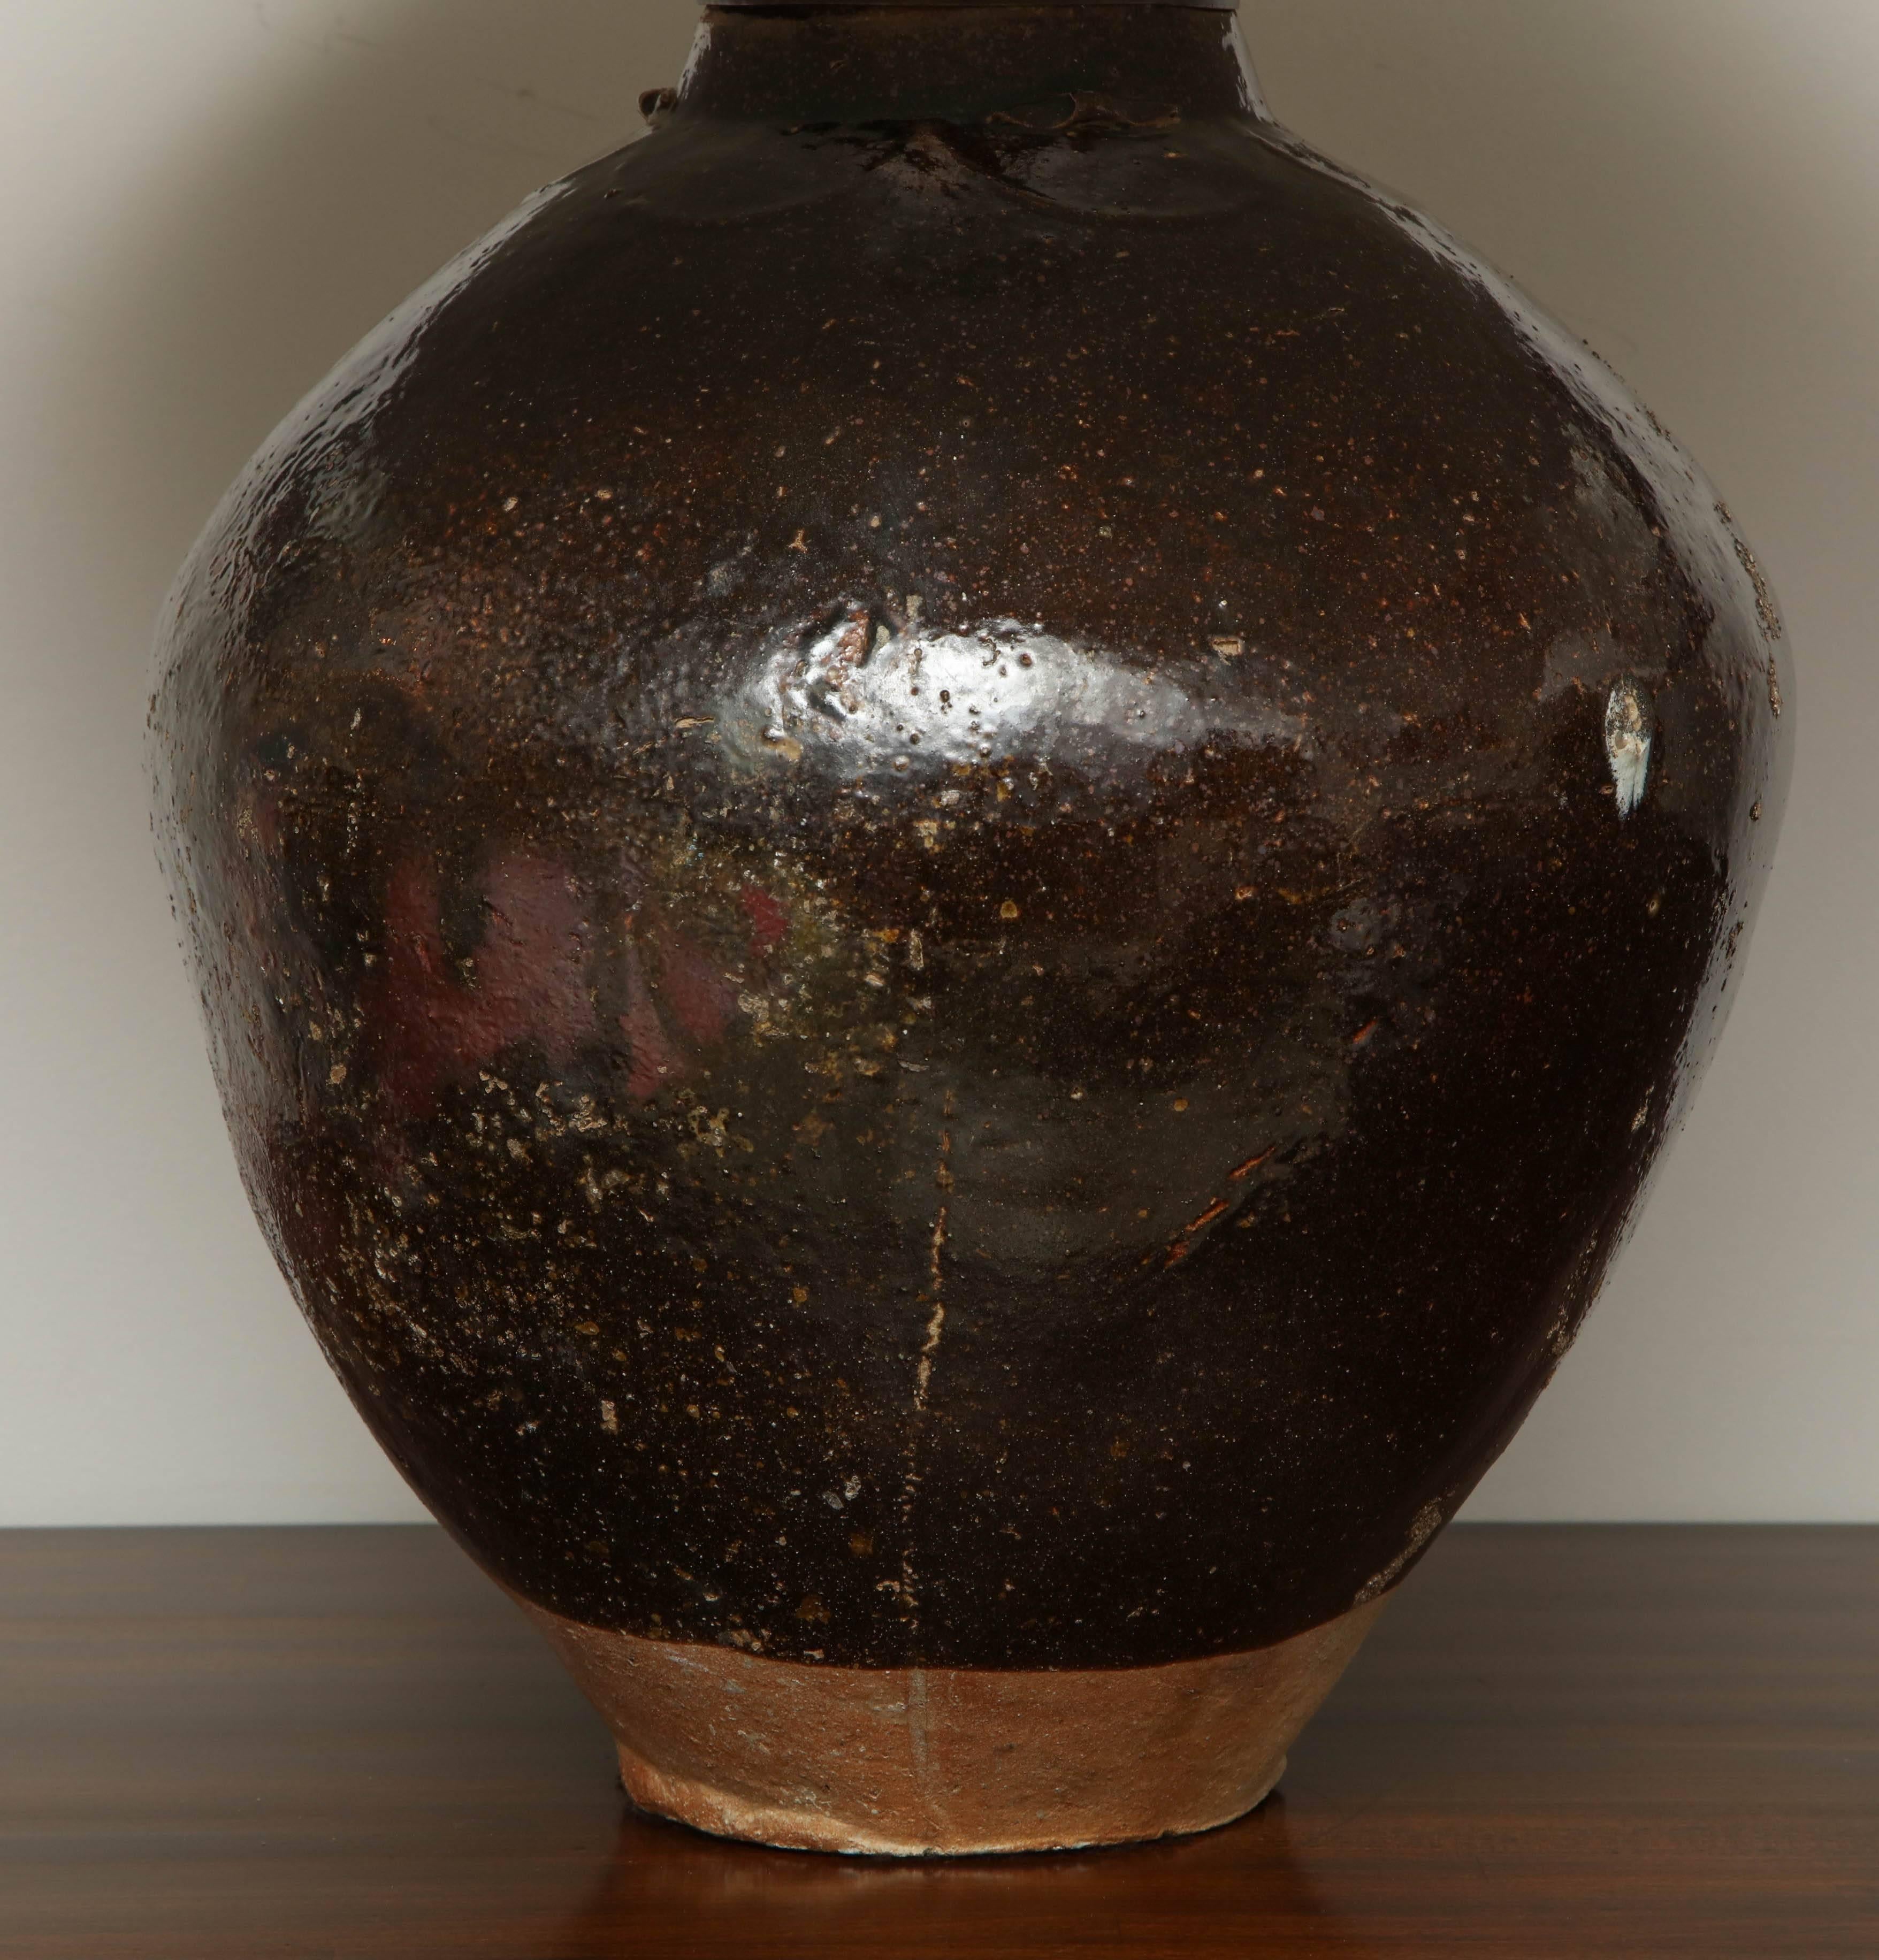 A lovely glazed wine vessel lamp of Chinese origin, made in the late 19th century.